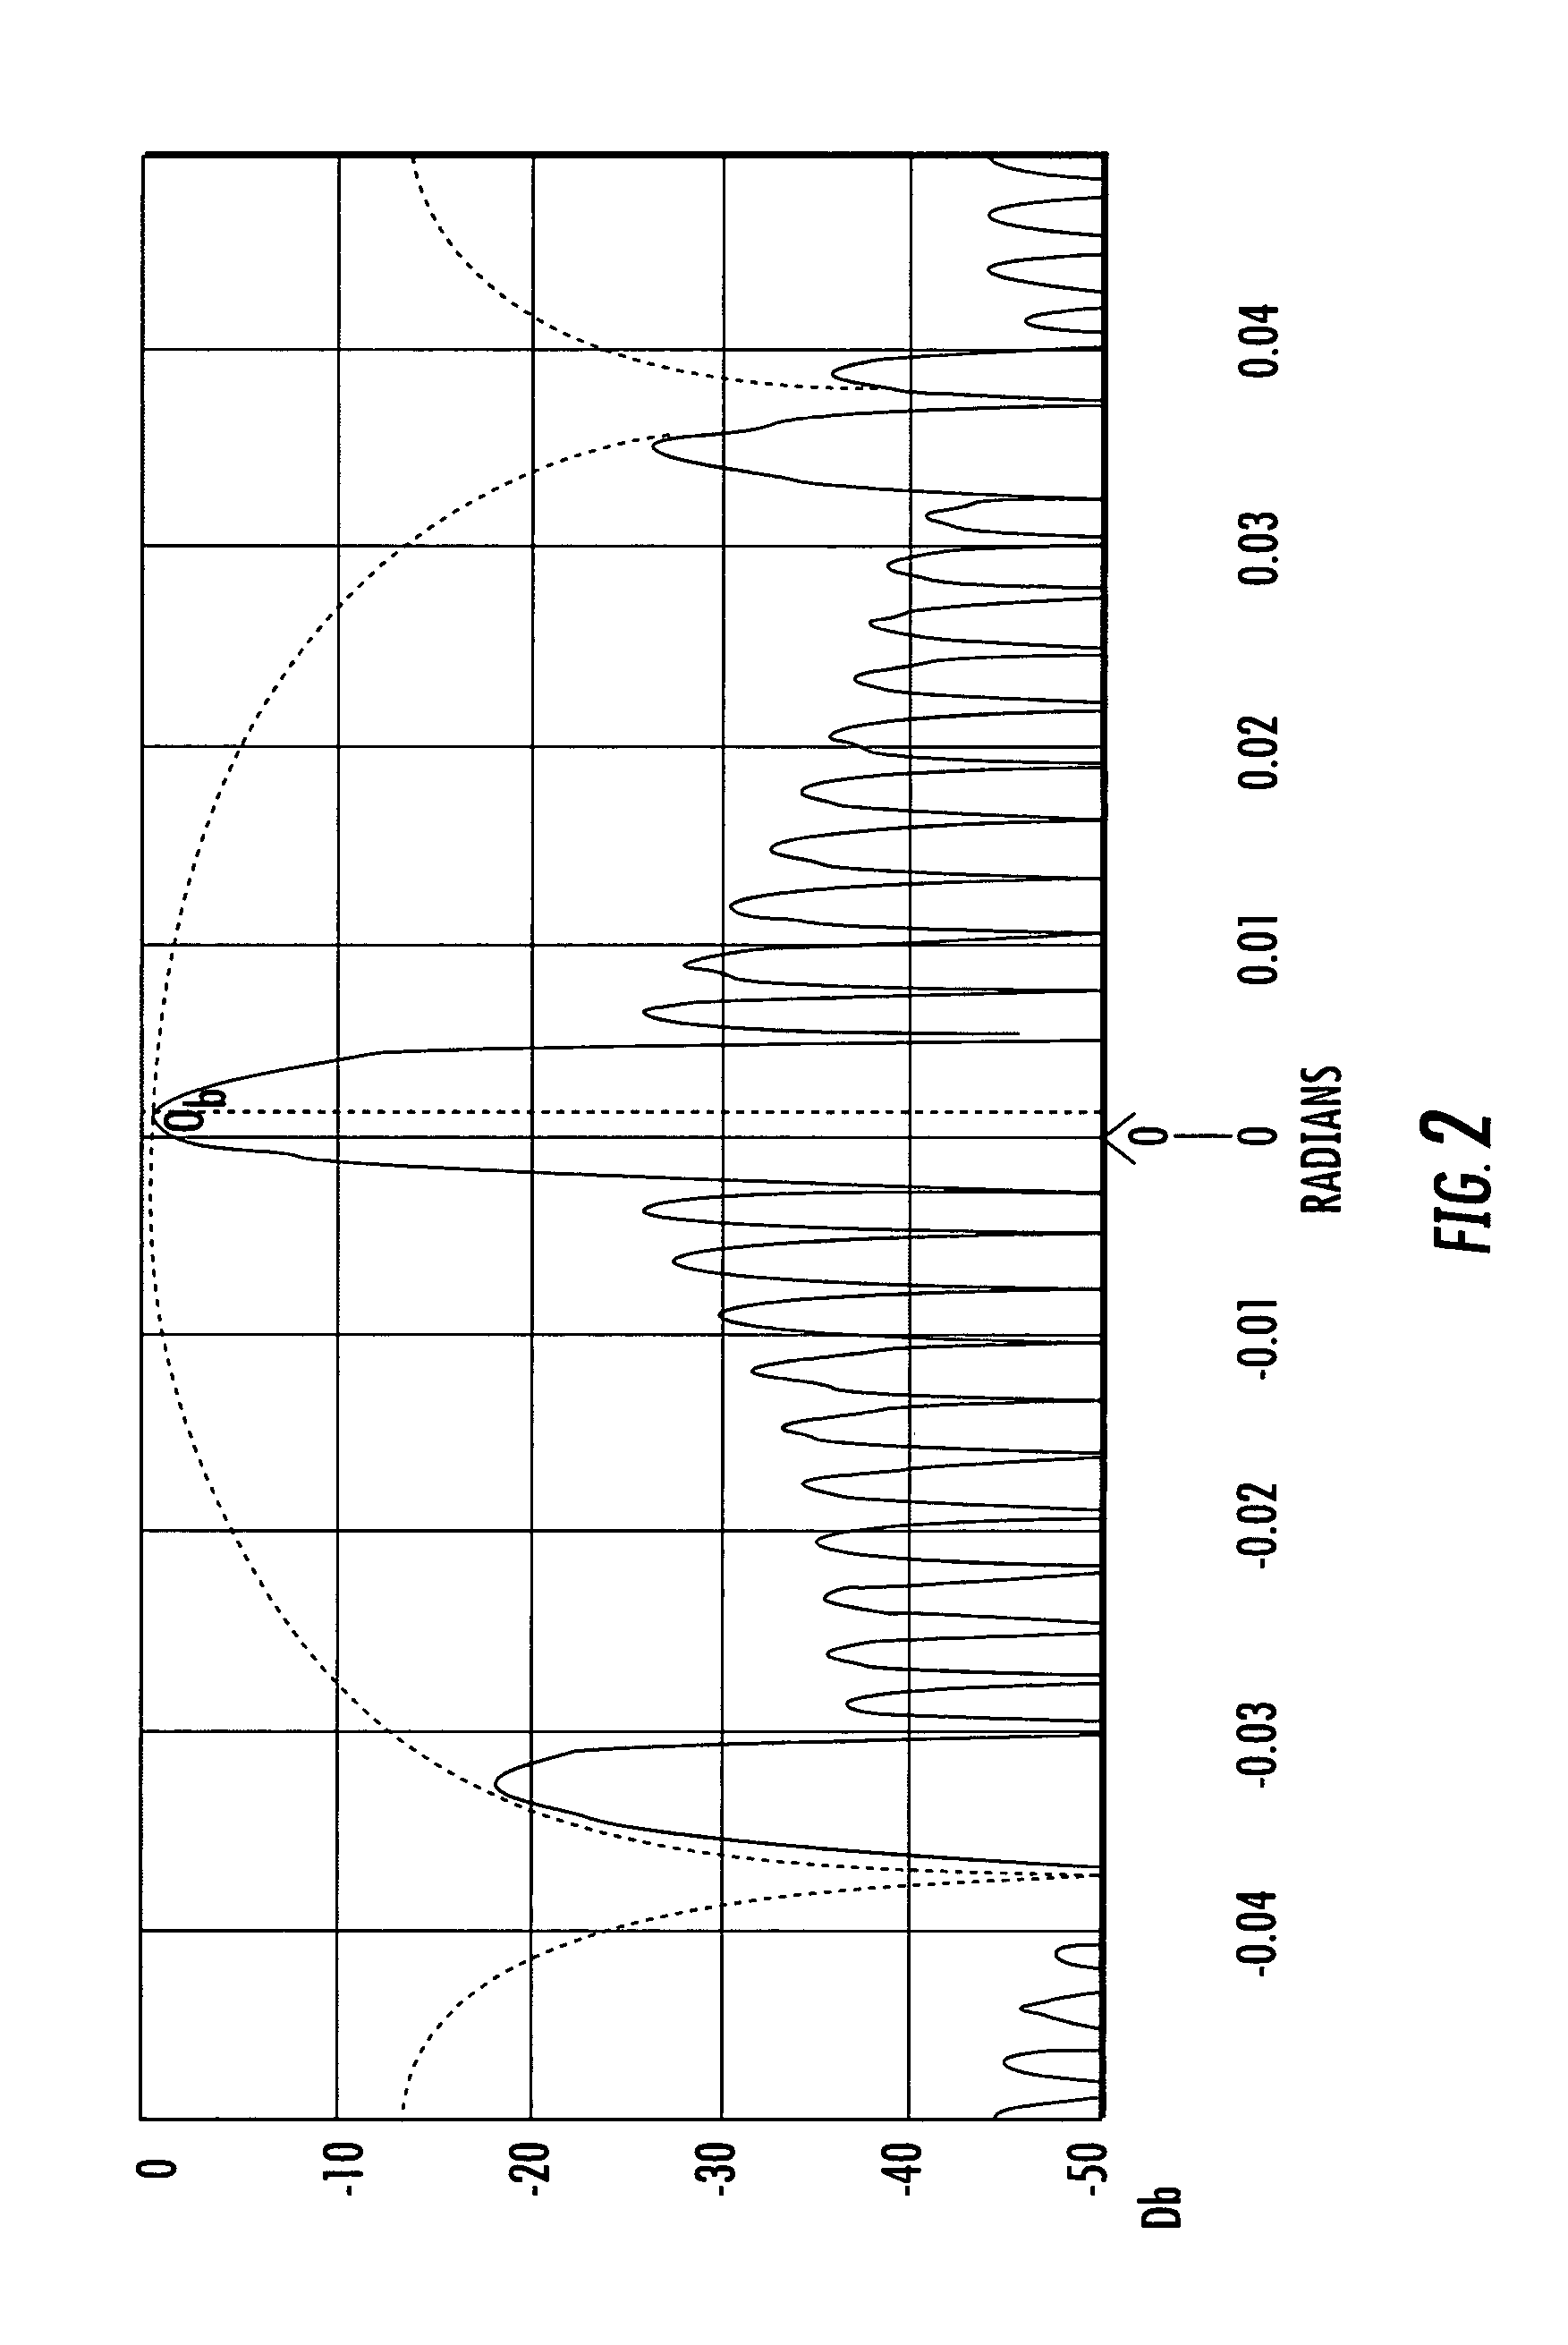 RF phase modulation technique for performing acousto-optic intensity modulation of an optical wavefront